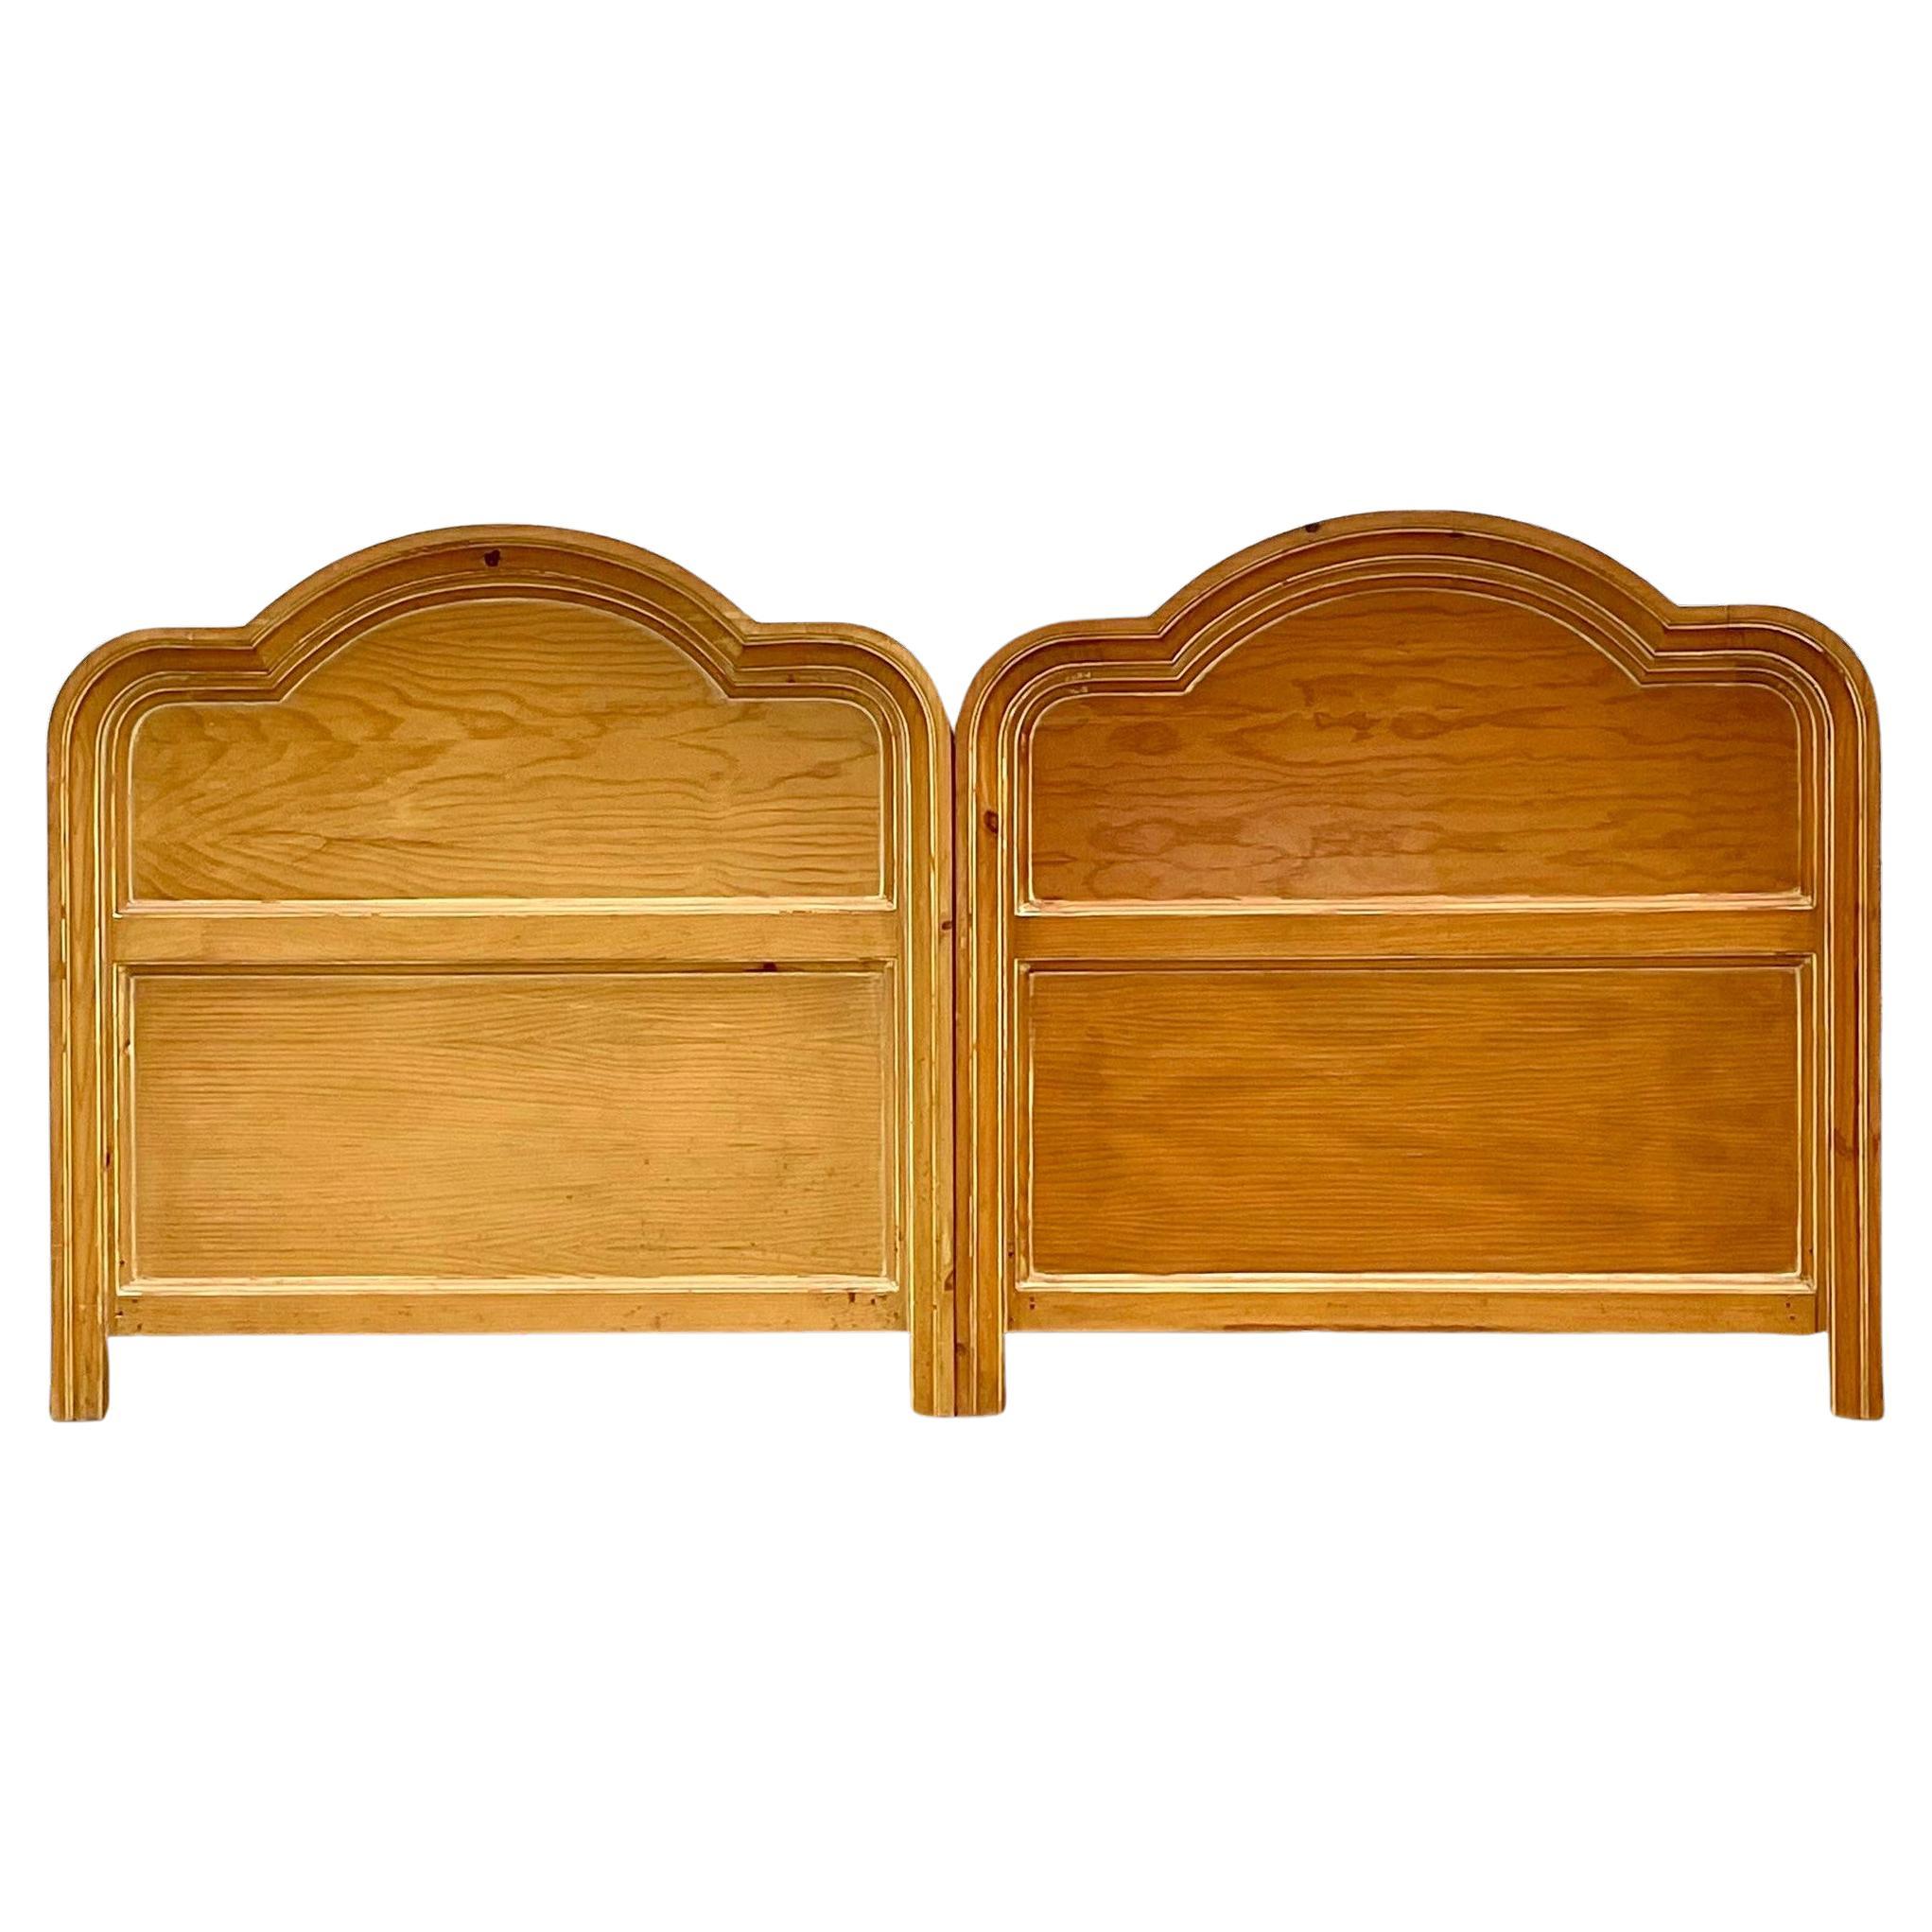 Late 20th Century Vintage Wooden Trim Detailed Twin Headboards - A Pair